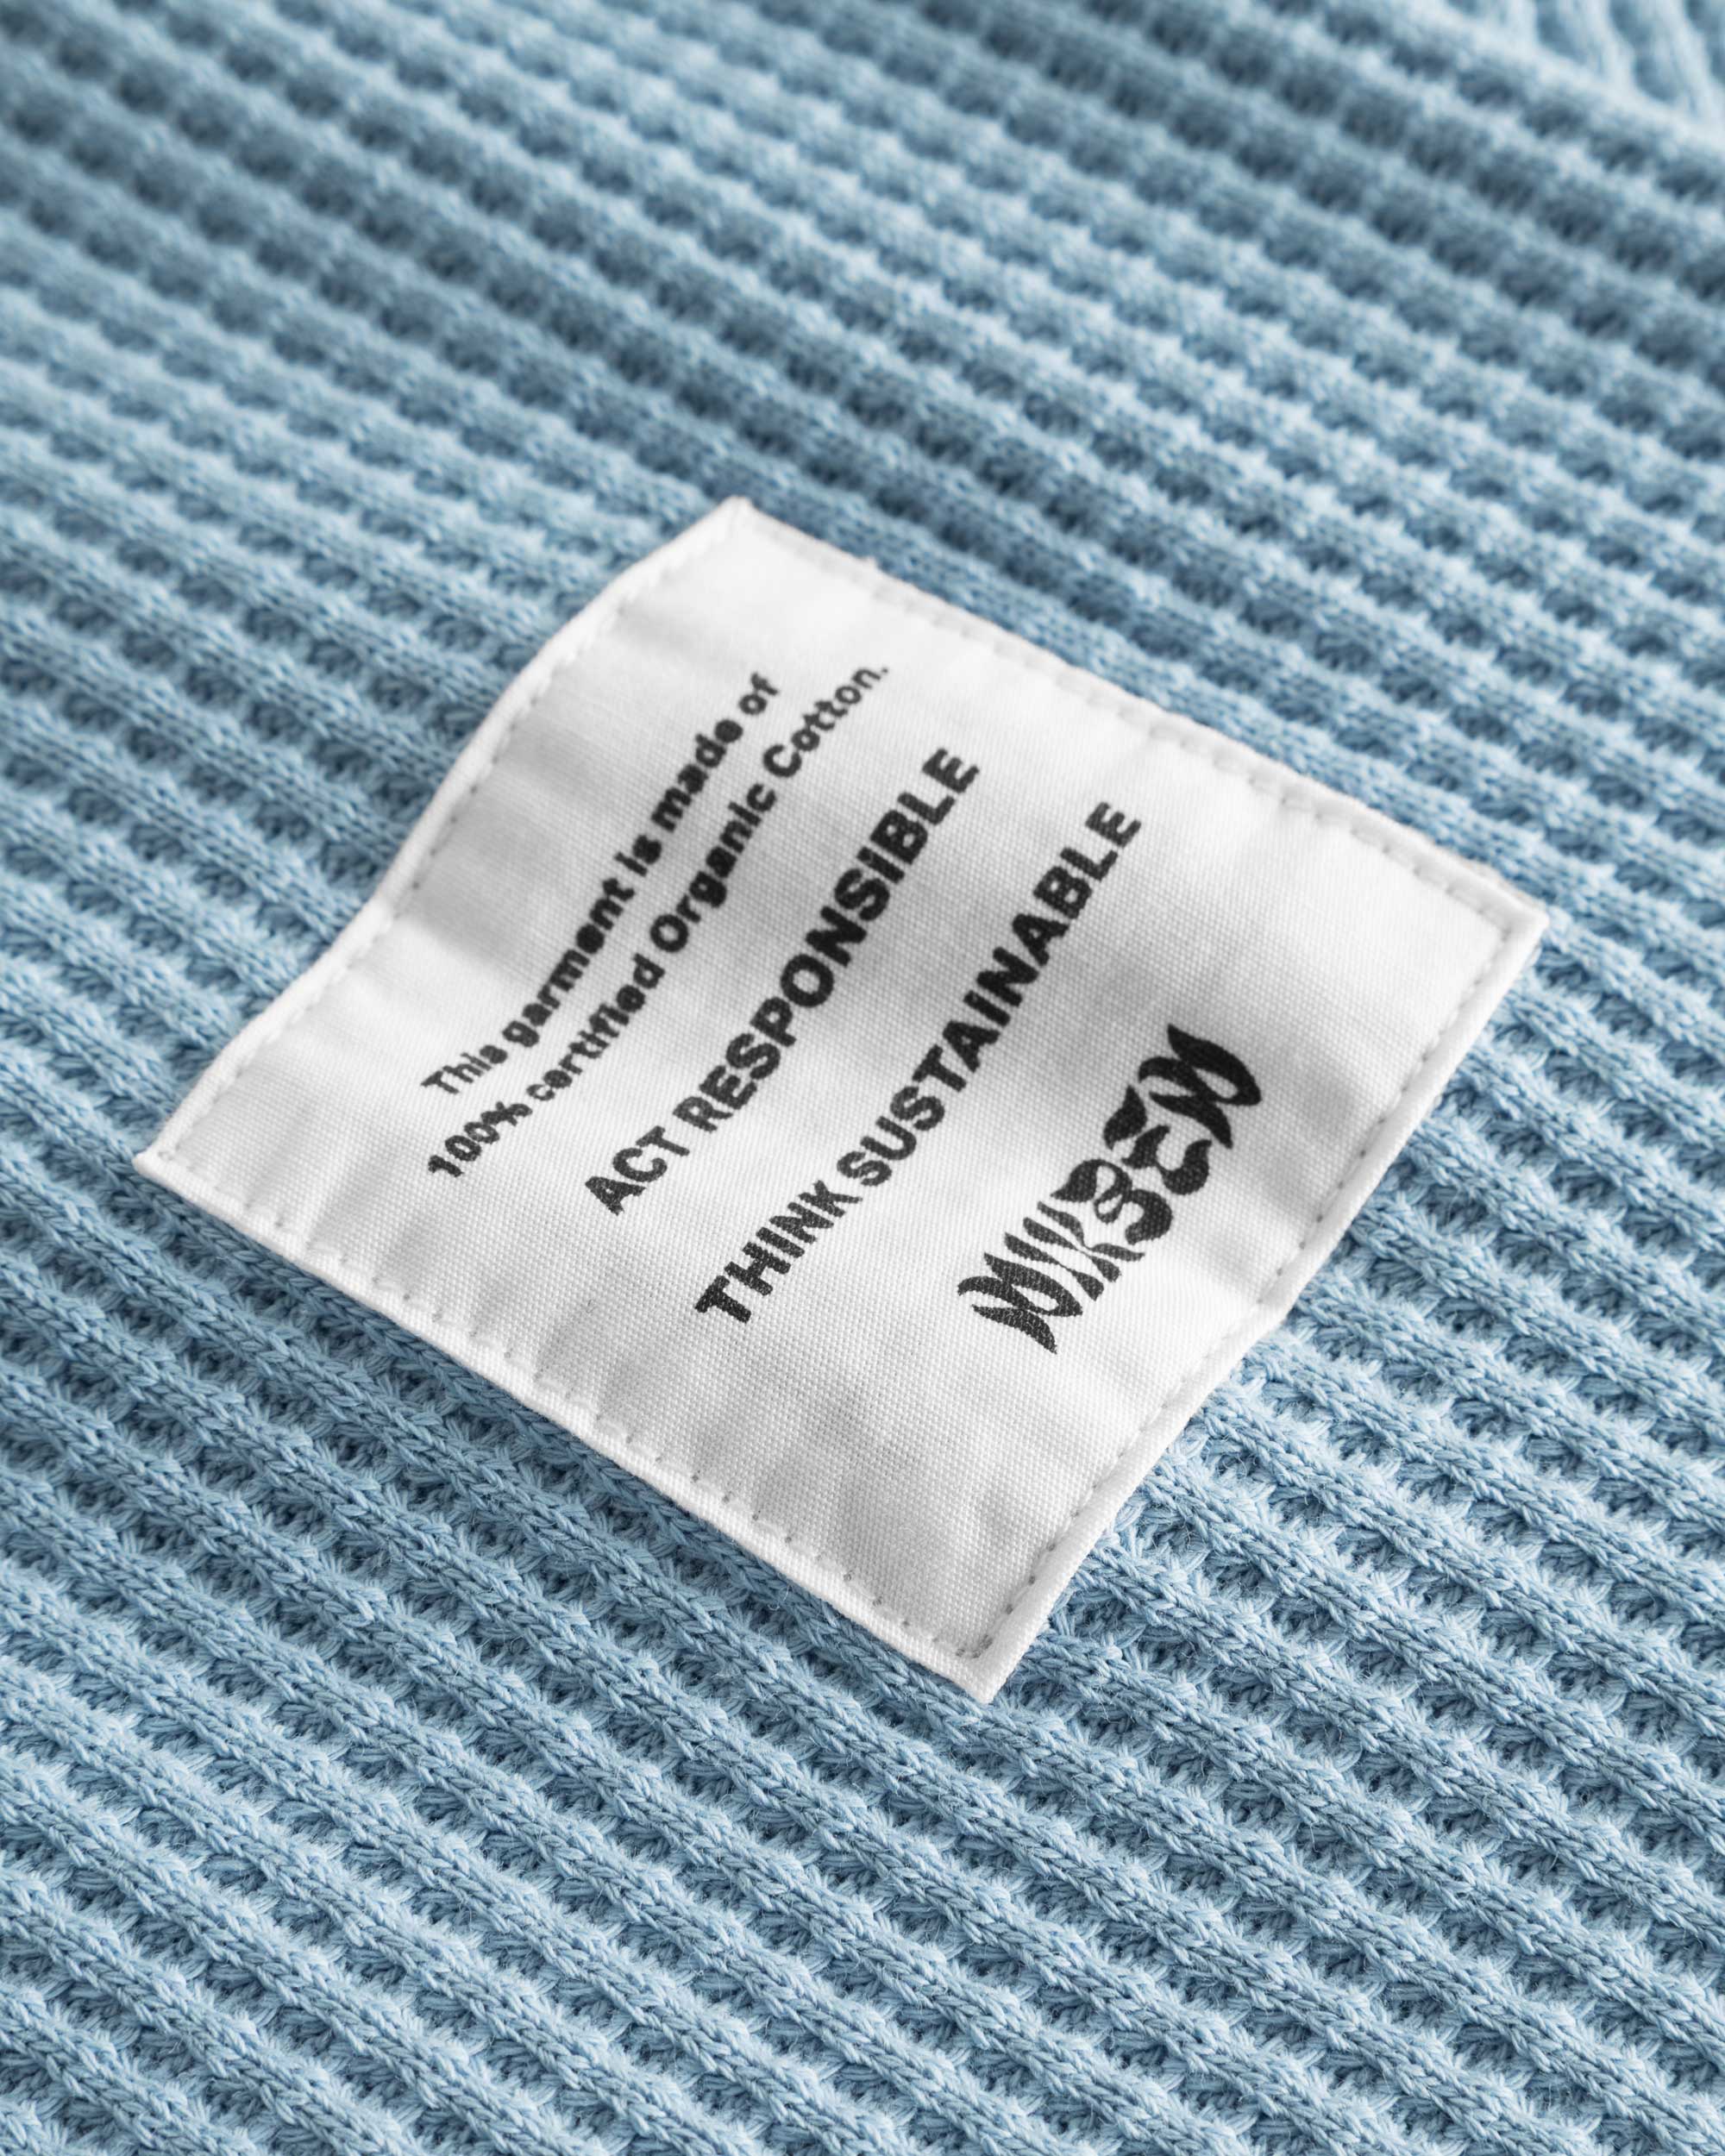 Close-up on a stitched-on material label on a sky blue waffle-patterned sweatshirt.